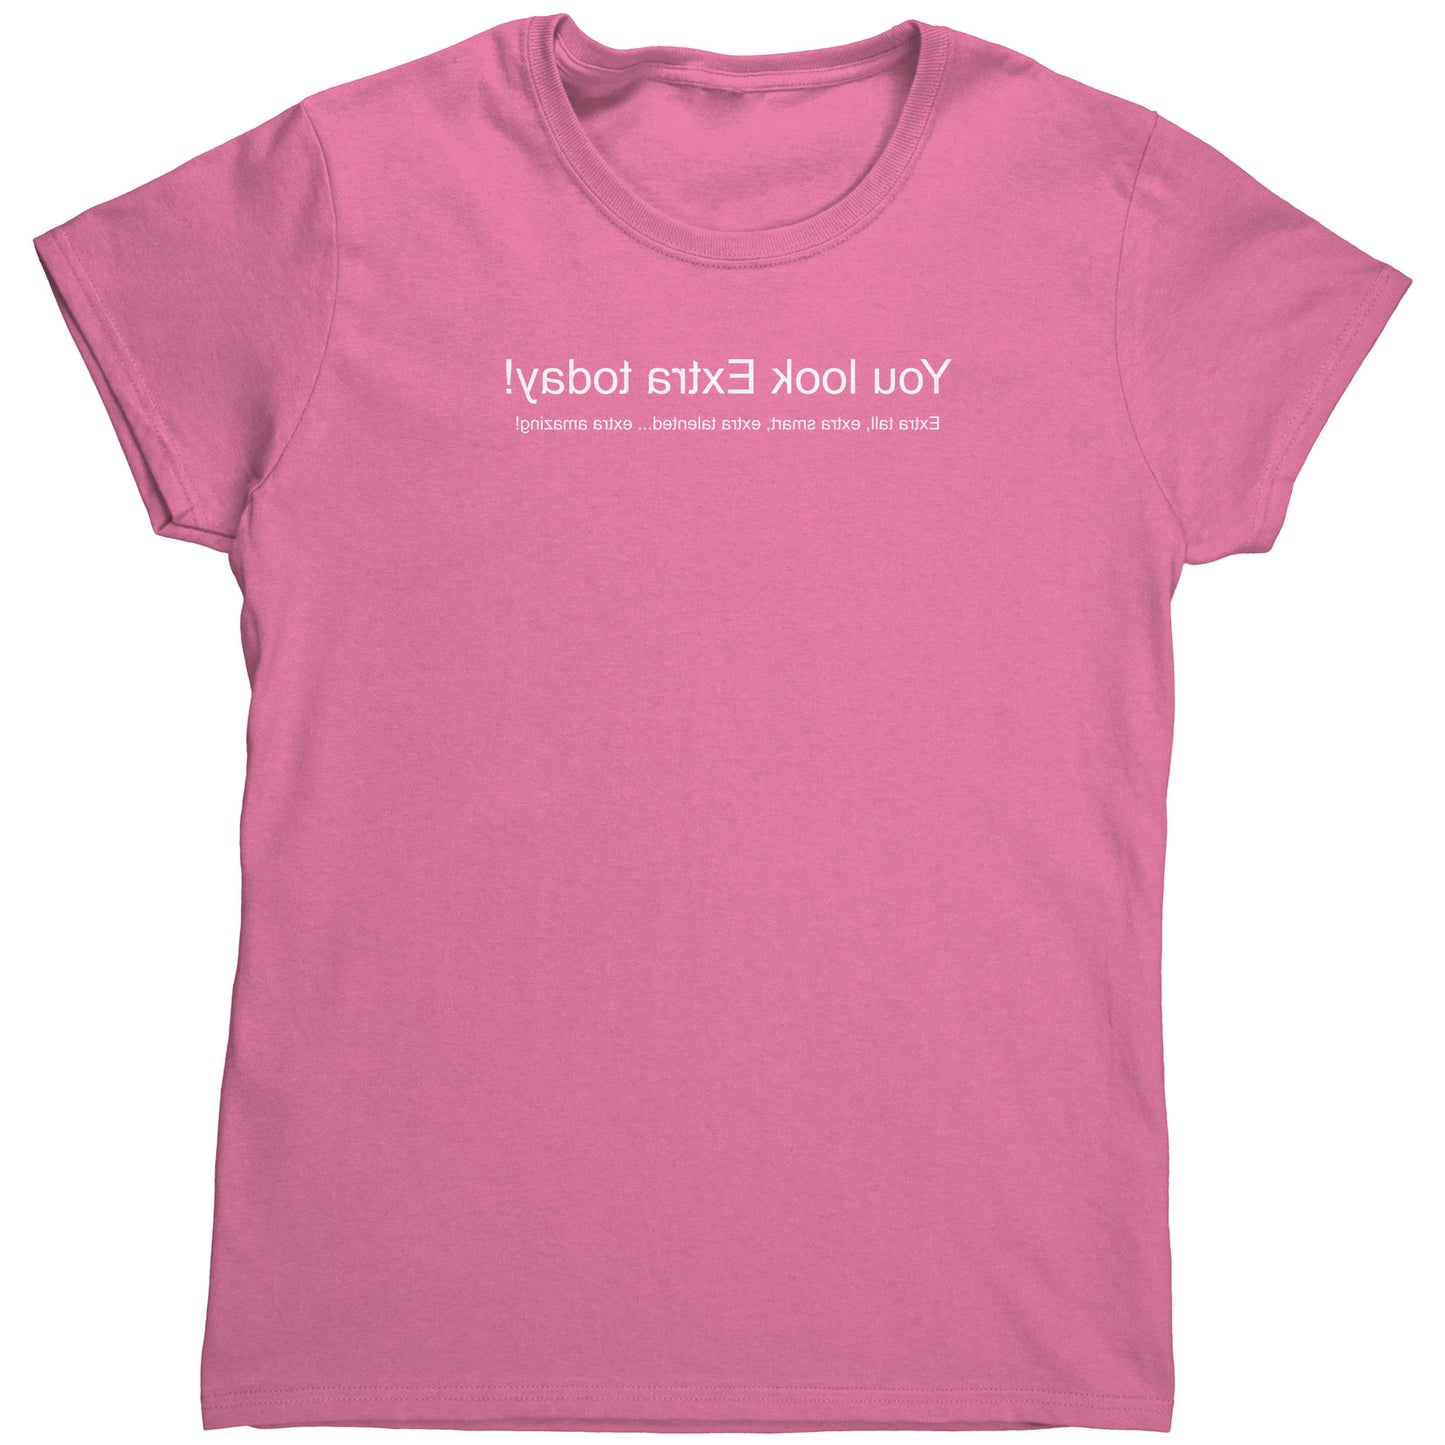 Extra Mirrored Women's Shirt With White Lettering